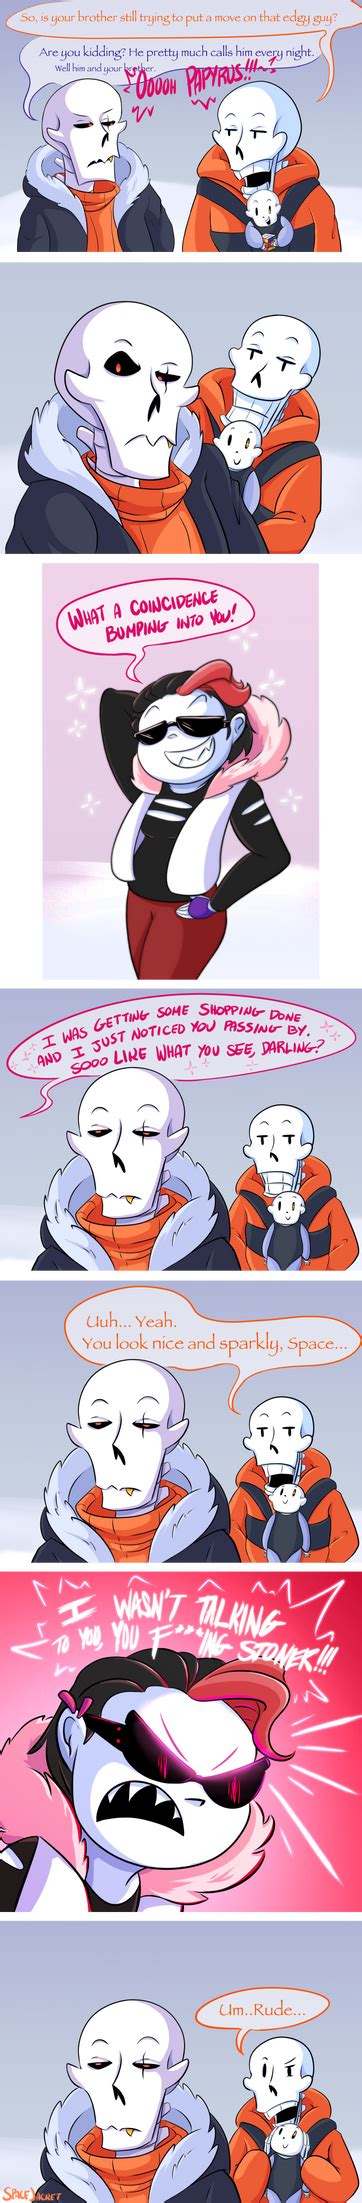 Undertale Swapfell A New Look Comic By Spacejacket On Deviantart